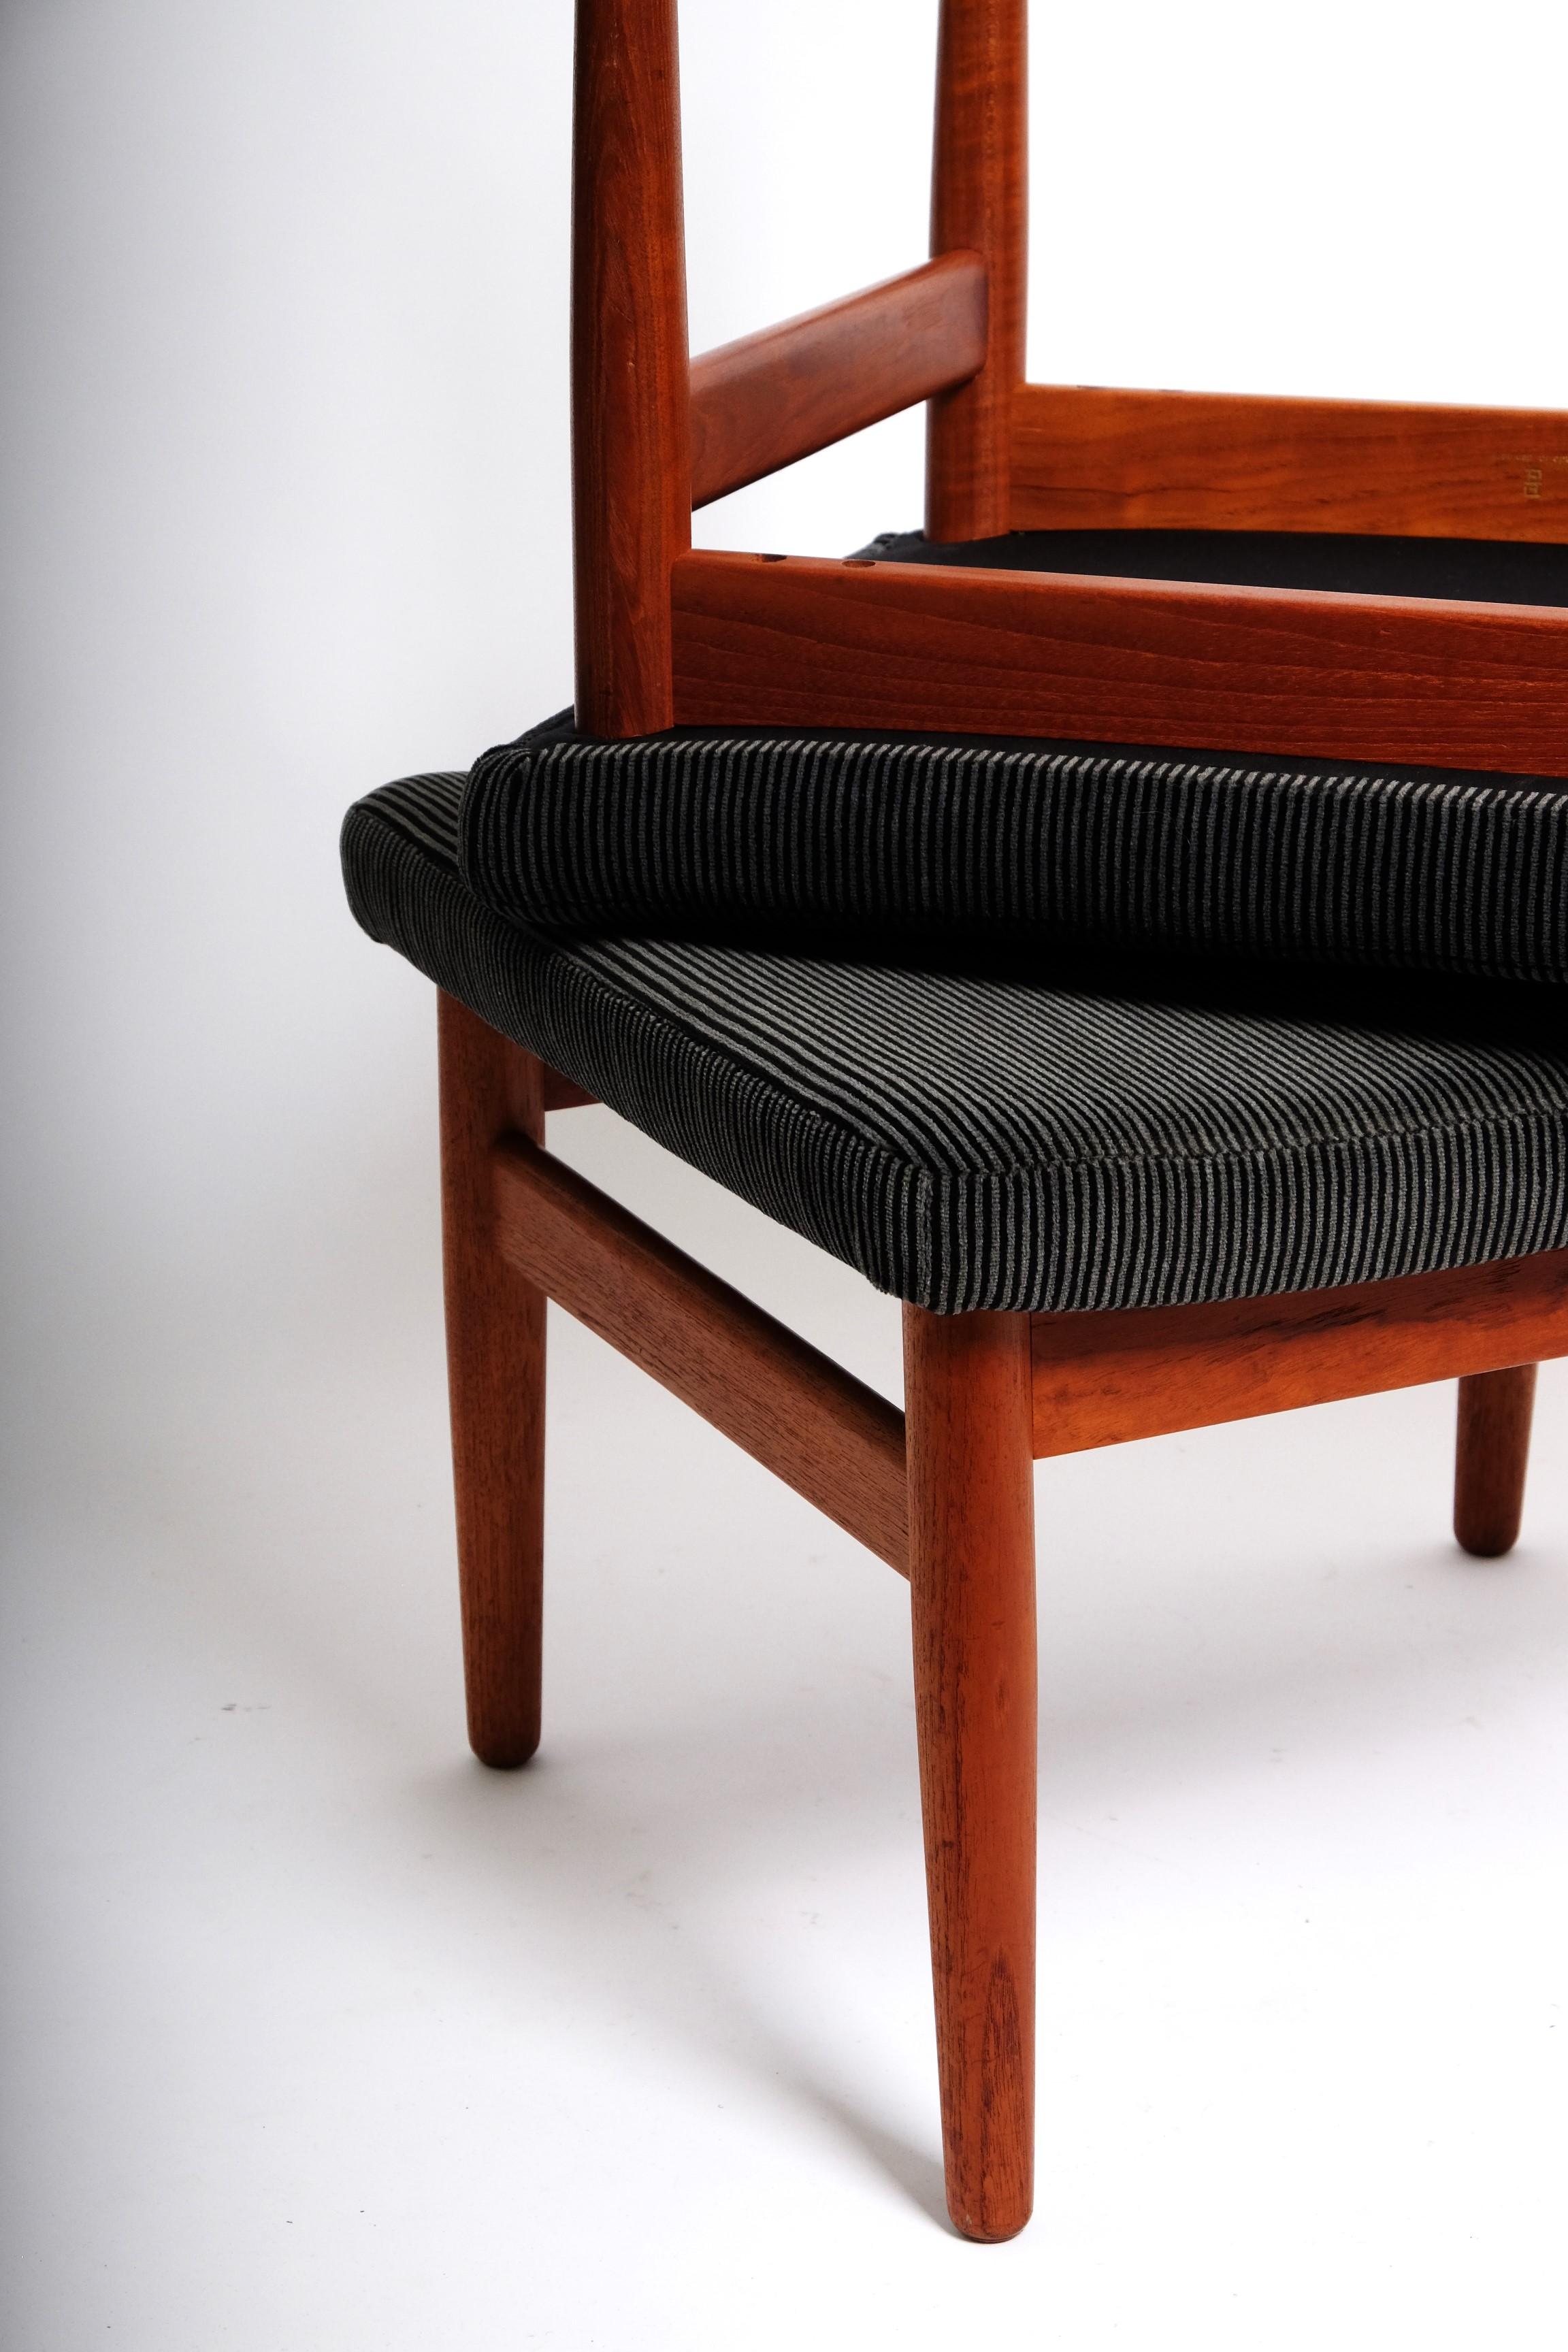 Two Mid-Century Stools by Arne Vodder FD164 Ottomans France & Son, Denmark 1960s For Sale 6